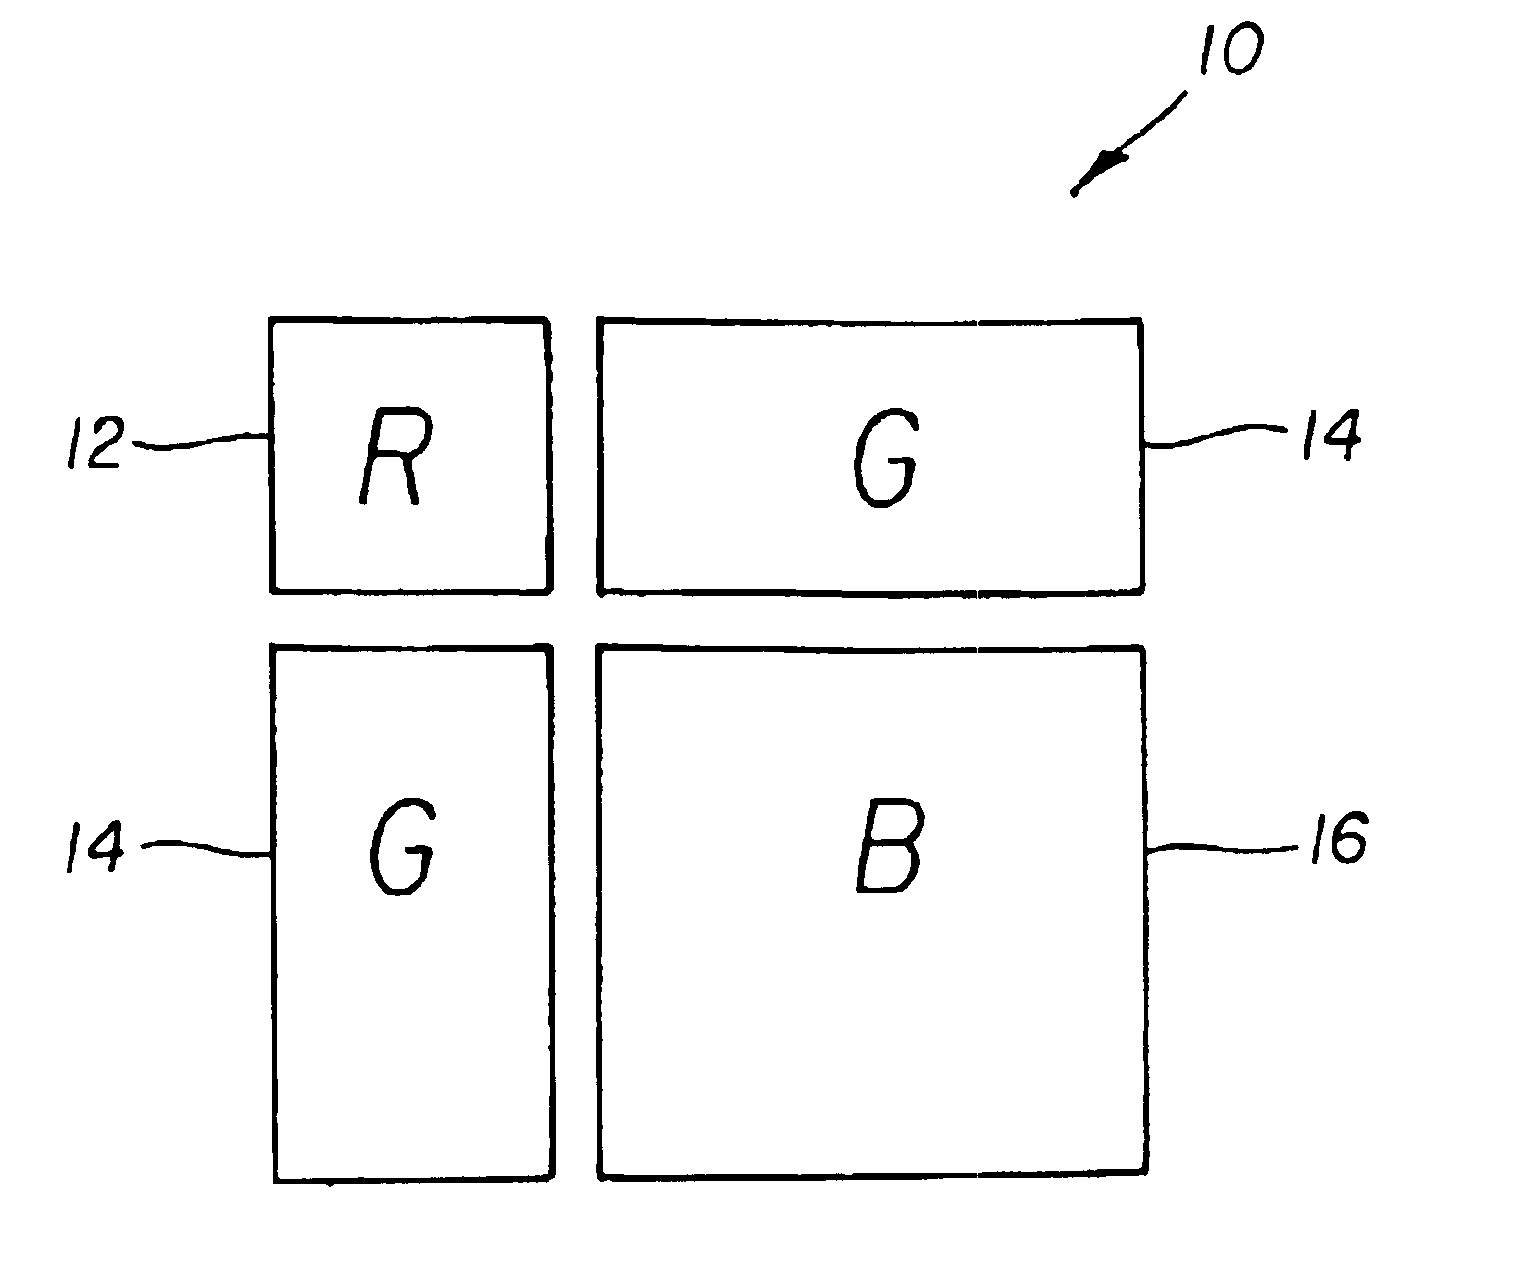 Color OLED display having repeated patterns of colored light emitting elements